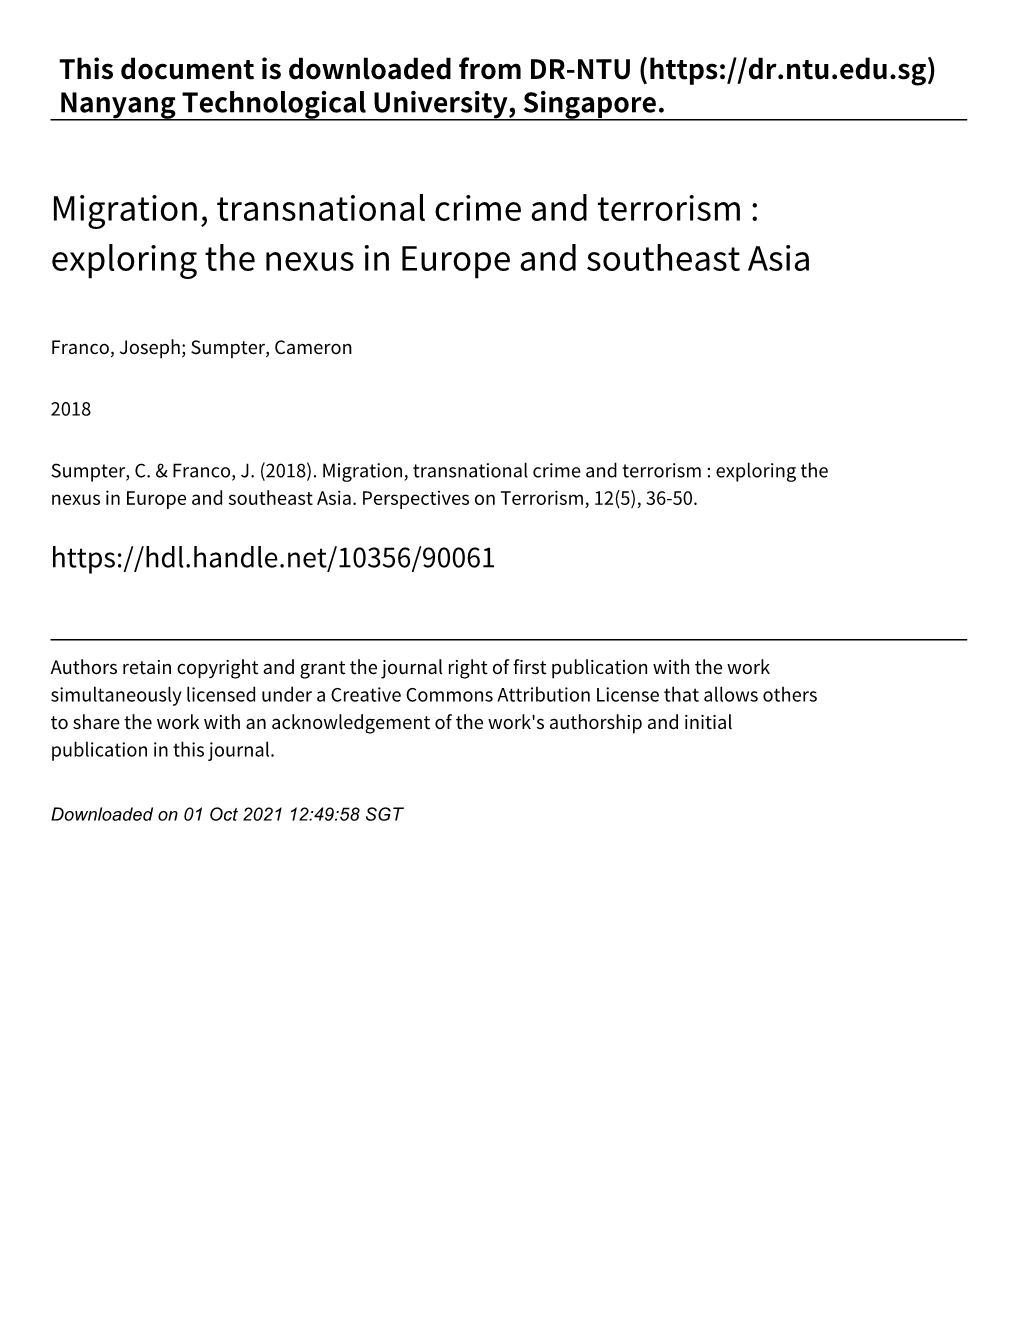 Migration, Transnational Crime and Terrorism : Exploring the Nexus in Europe and Southeast Asia